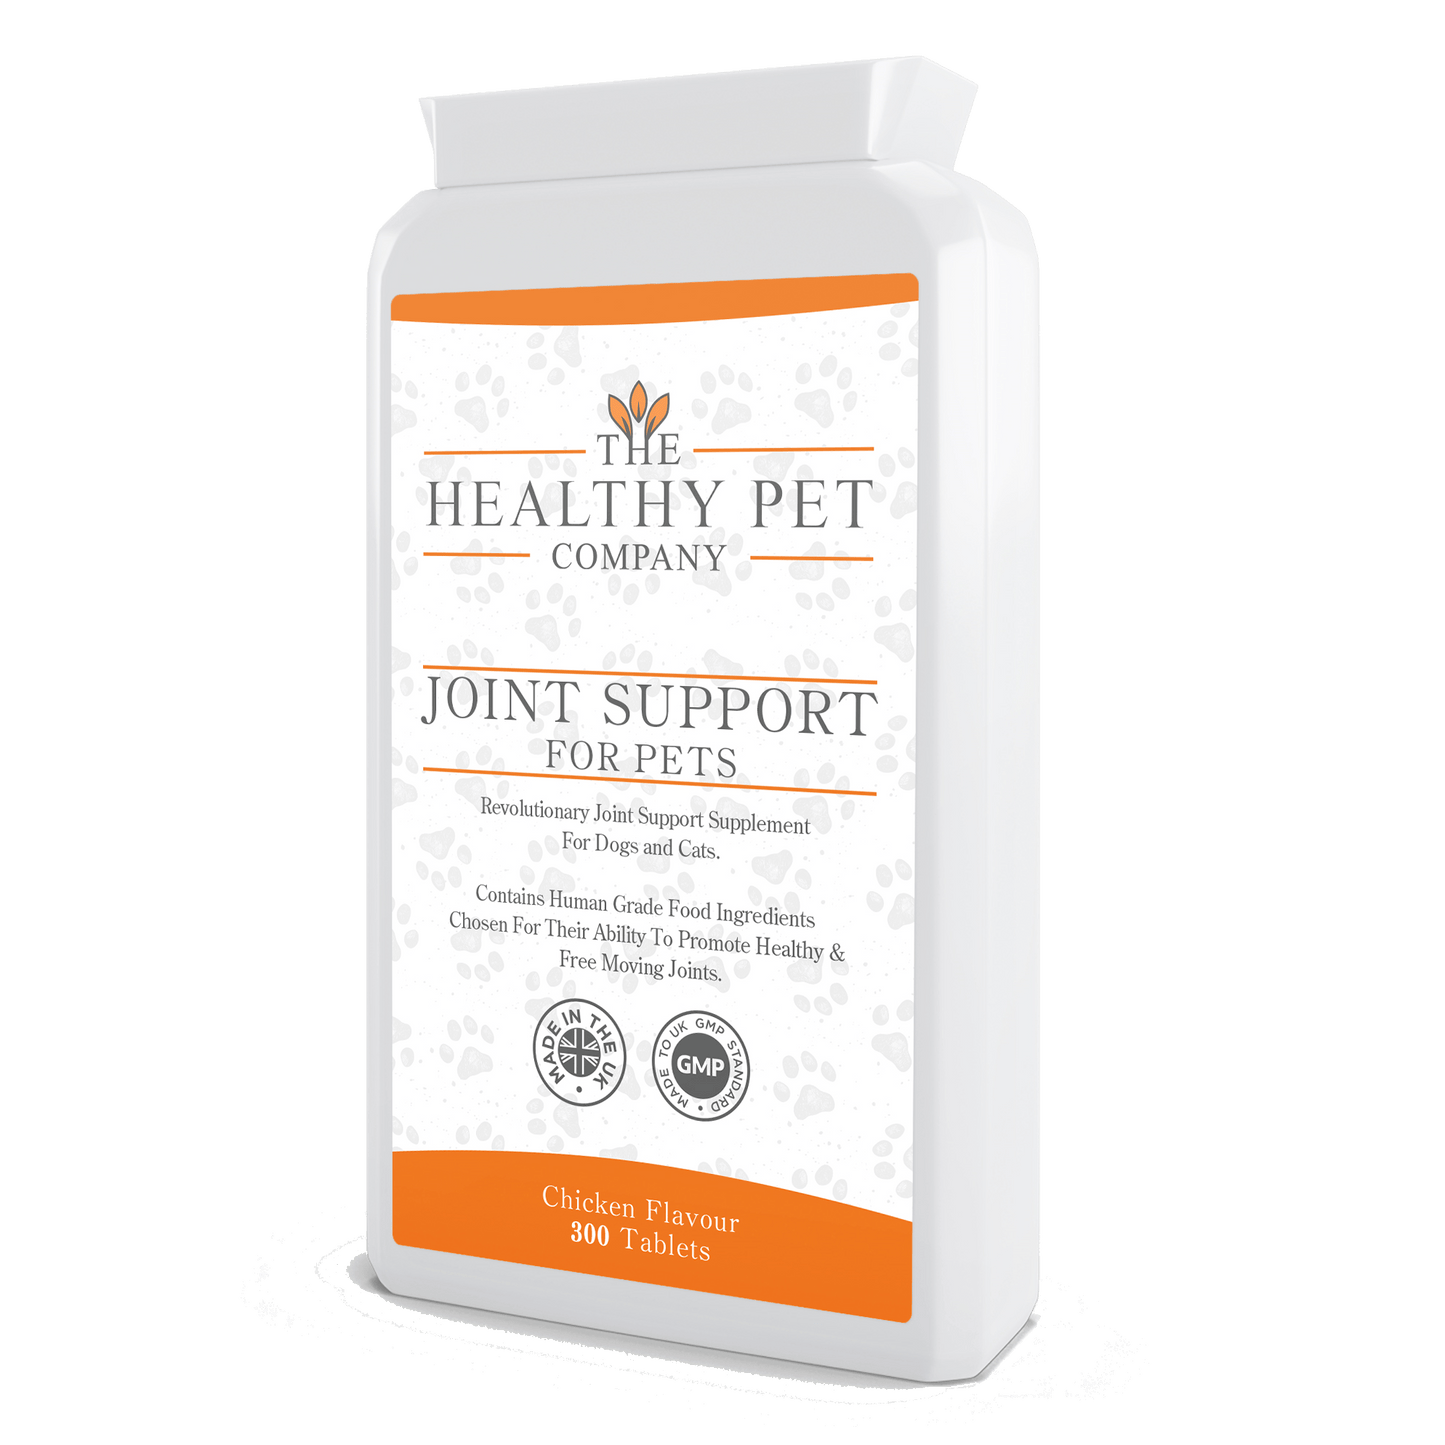 The Healthy Pet Company Joint Support Supplement (300) - The Healthy Pet Company